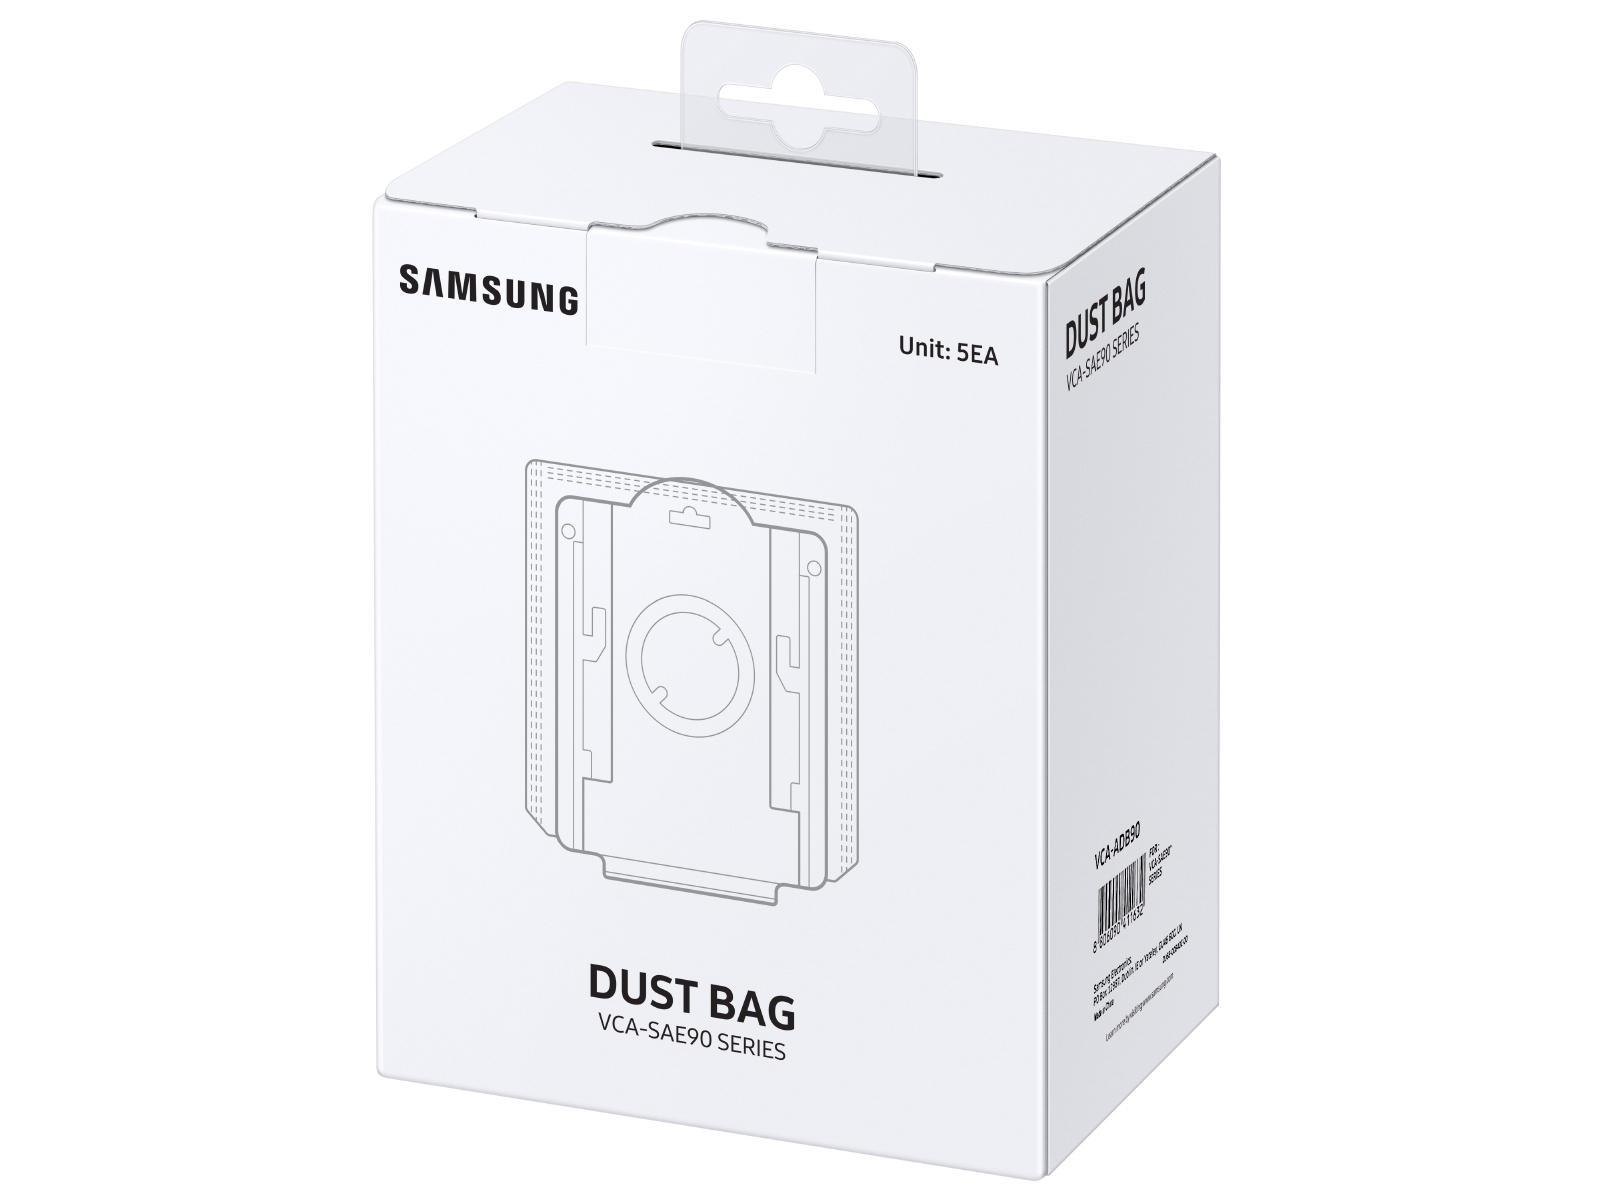 VCARDB95 in by Samsung in Canaan, CT - Samsung Jet Bot Clean Station Dust  Bags (5 pack)